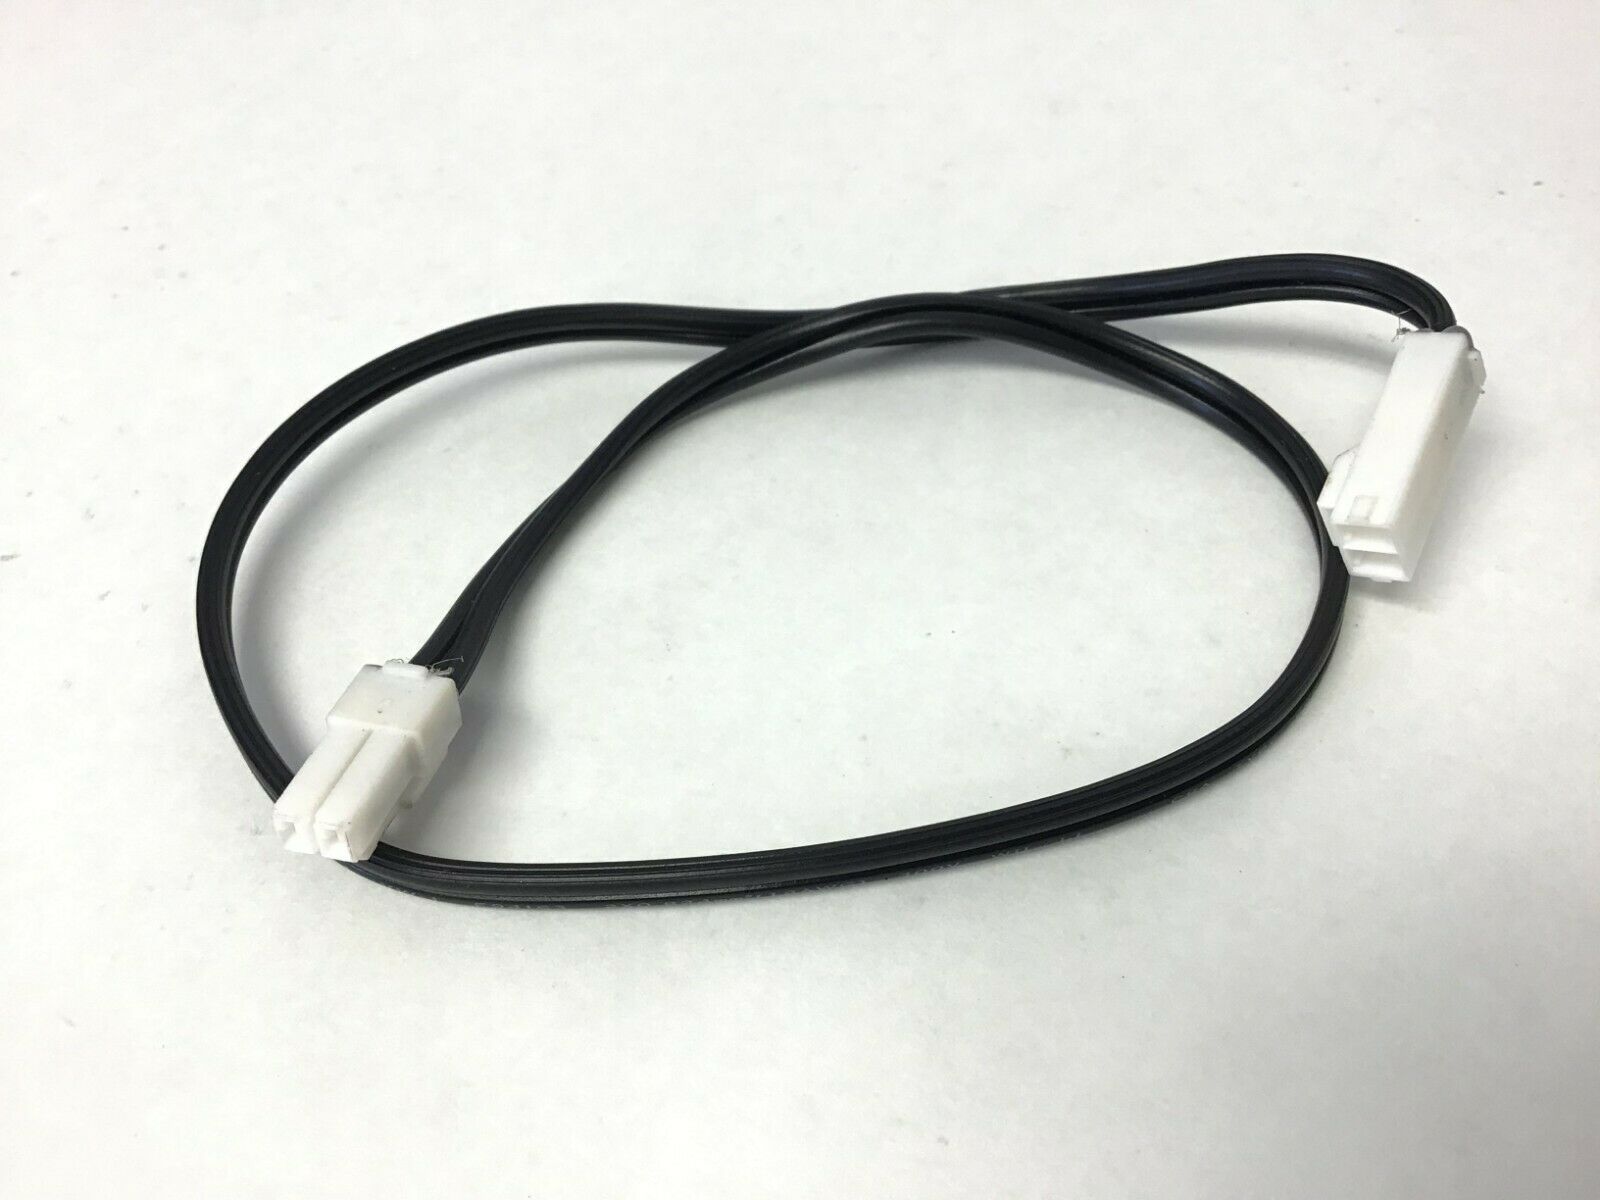 True Fitness XLC900 Elliptical Coaxial Interconnect Male to Male Wire Harness (Used)